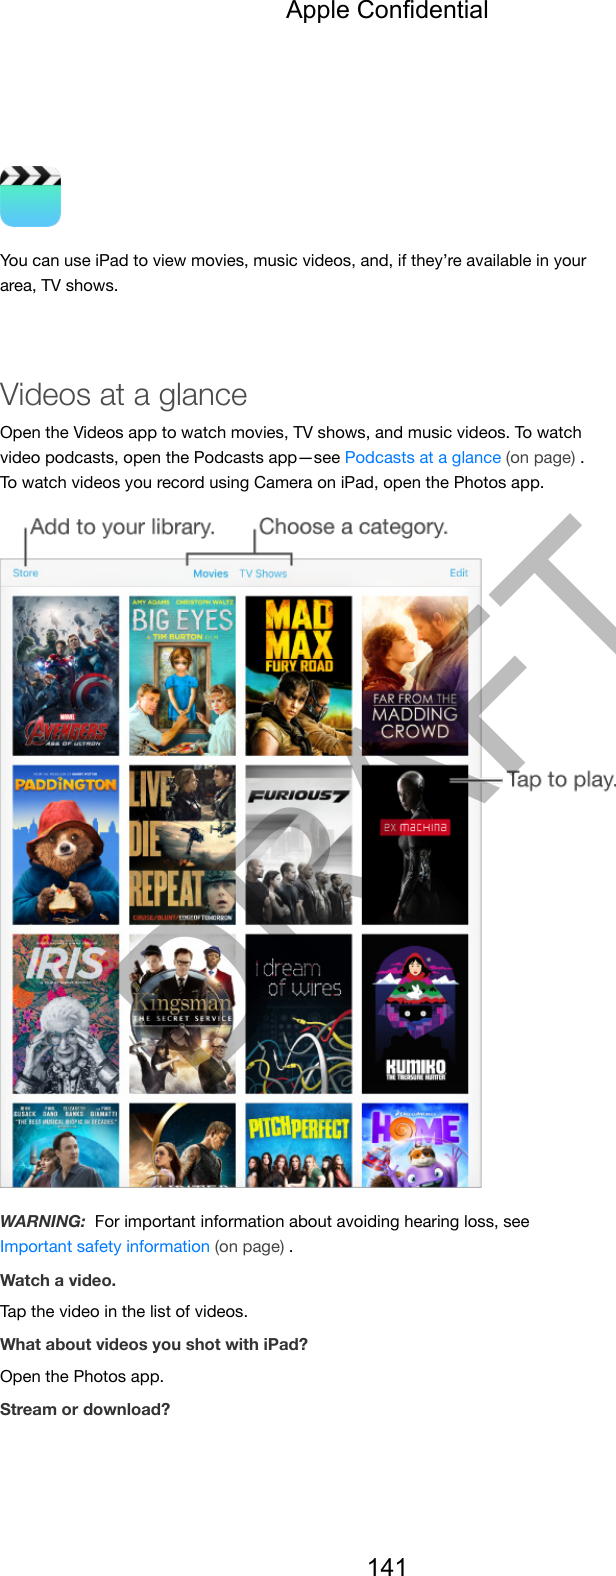 You can use iPad to view movies, music videos, and, if they’re available in yourarea, TV shows.Videos at a glanceOpen the Videos app to watch movies, TV shows, and music videos. To watchvideo podcasts, open the Podcasts app—see Podcasts at a glance (on page) .To watch videos you record using Camera on iPad, open the Photos app.WARNING:  For important information about avoiding hearing loss, seeImportant safety information (on page) .Watch a video.Tap the video in the list of videos.What about videos you shot with iPad?Open the Photos app.Stream or download?Apple Confidential141DRAFT